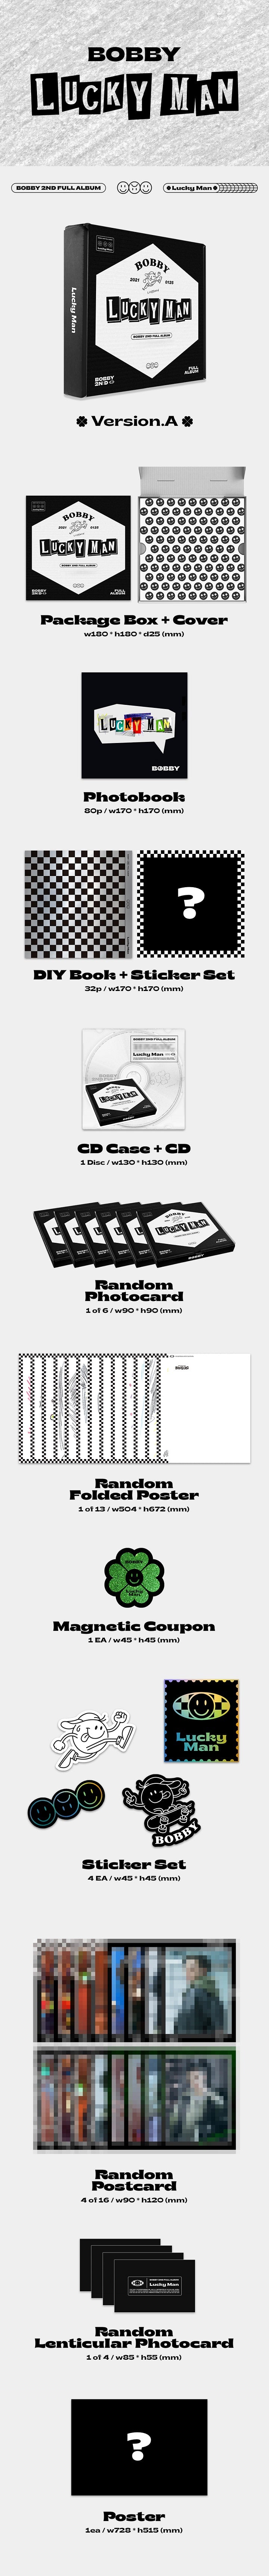 1 CD
1 Folding Poster
1 Photo Book (80 pages)
1 DIY Book (32 pages)
4 Stickers
1 Photo Card
1 Magnetic Coupon
4 Posts
1 Le...